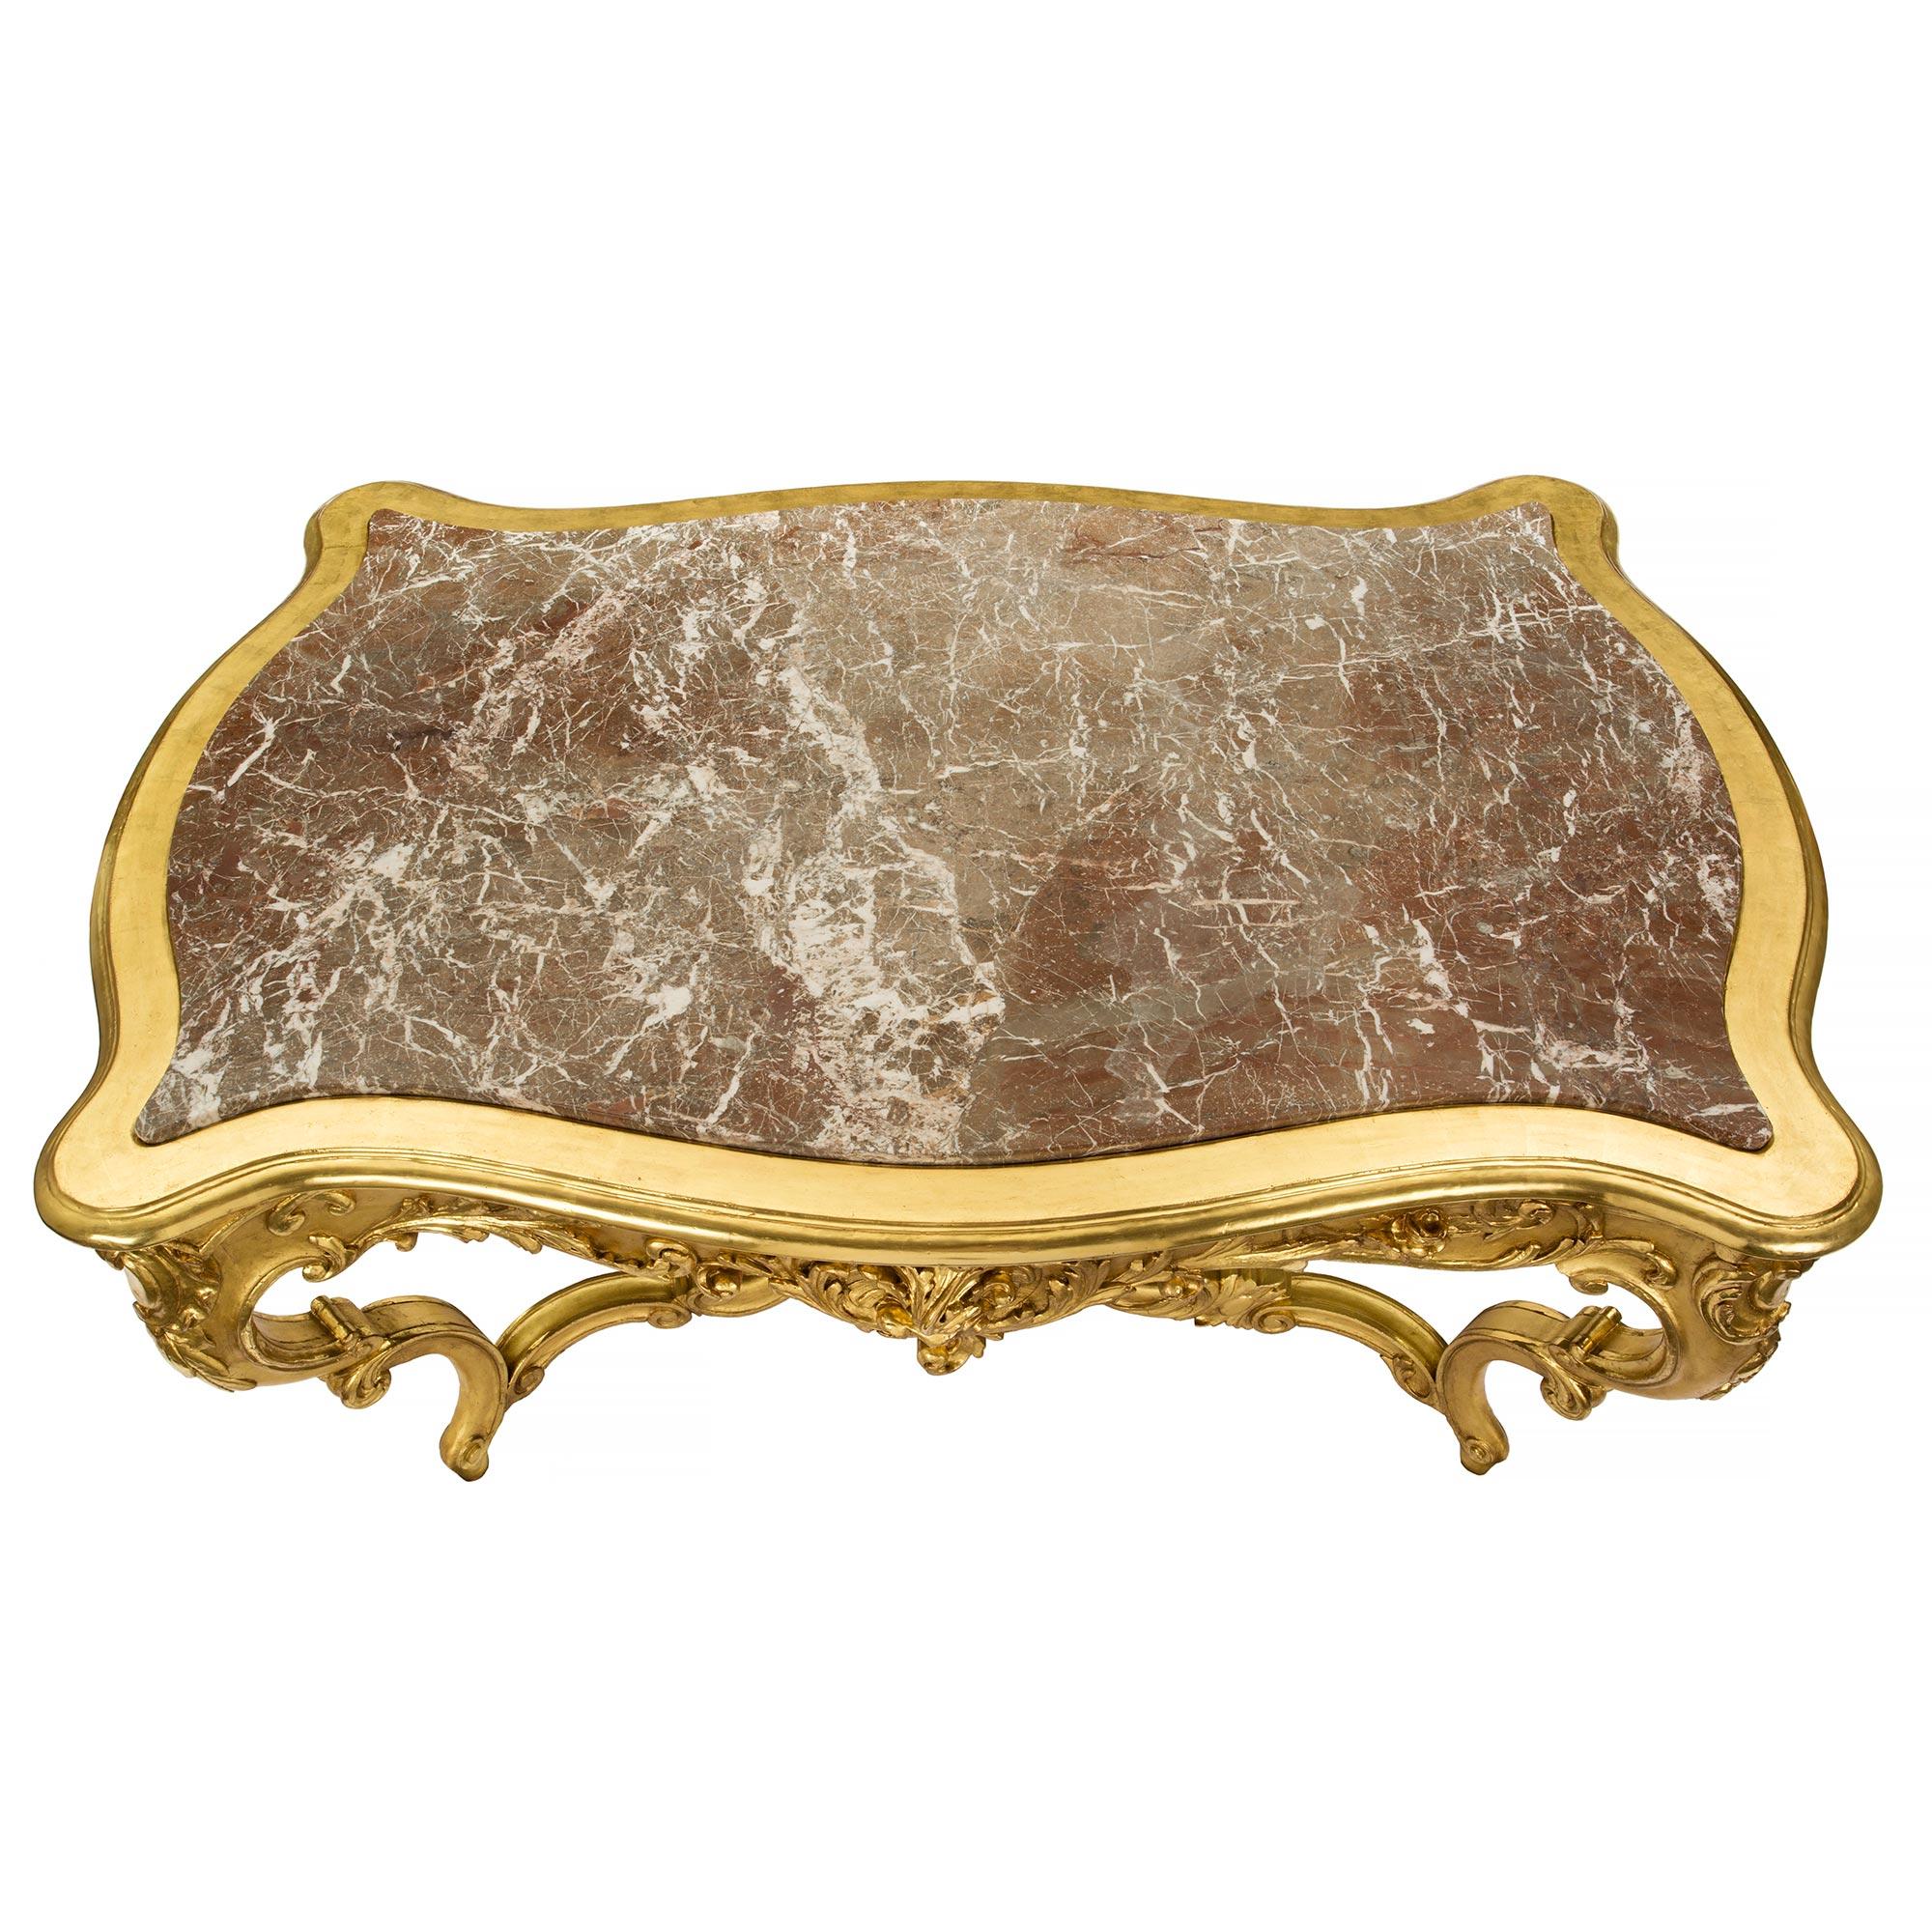 A sensational Italian 19th century Louis XV st. giltwood and marble center table with one drawer. The table is raised by exceptional scrolled legs with foliate movements and a most impressive elaborately carved central stretcher. Above each leg are